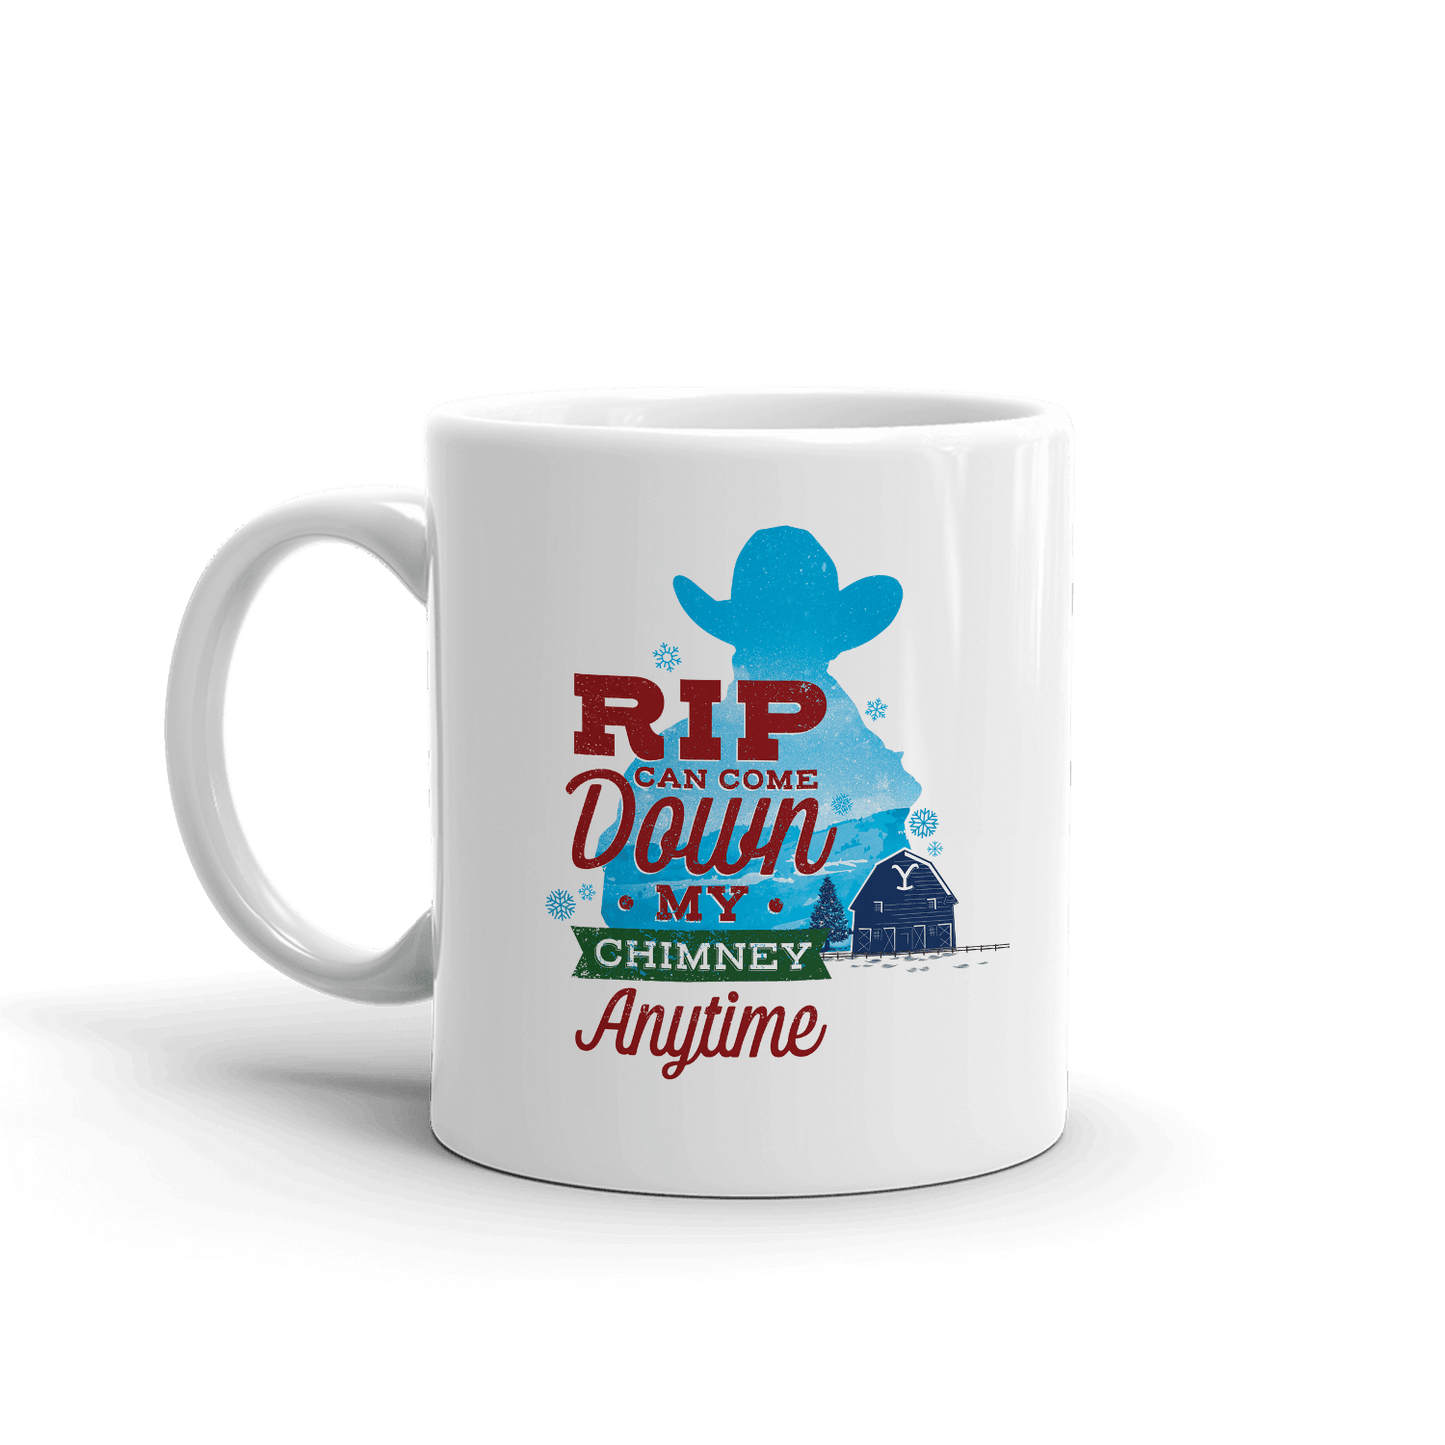 Yellowstone Rip Can Come Down My Chimney Anytime Silhouette White Mug - Paramount Shop